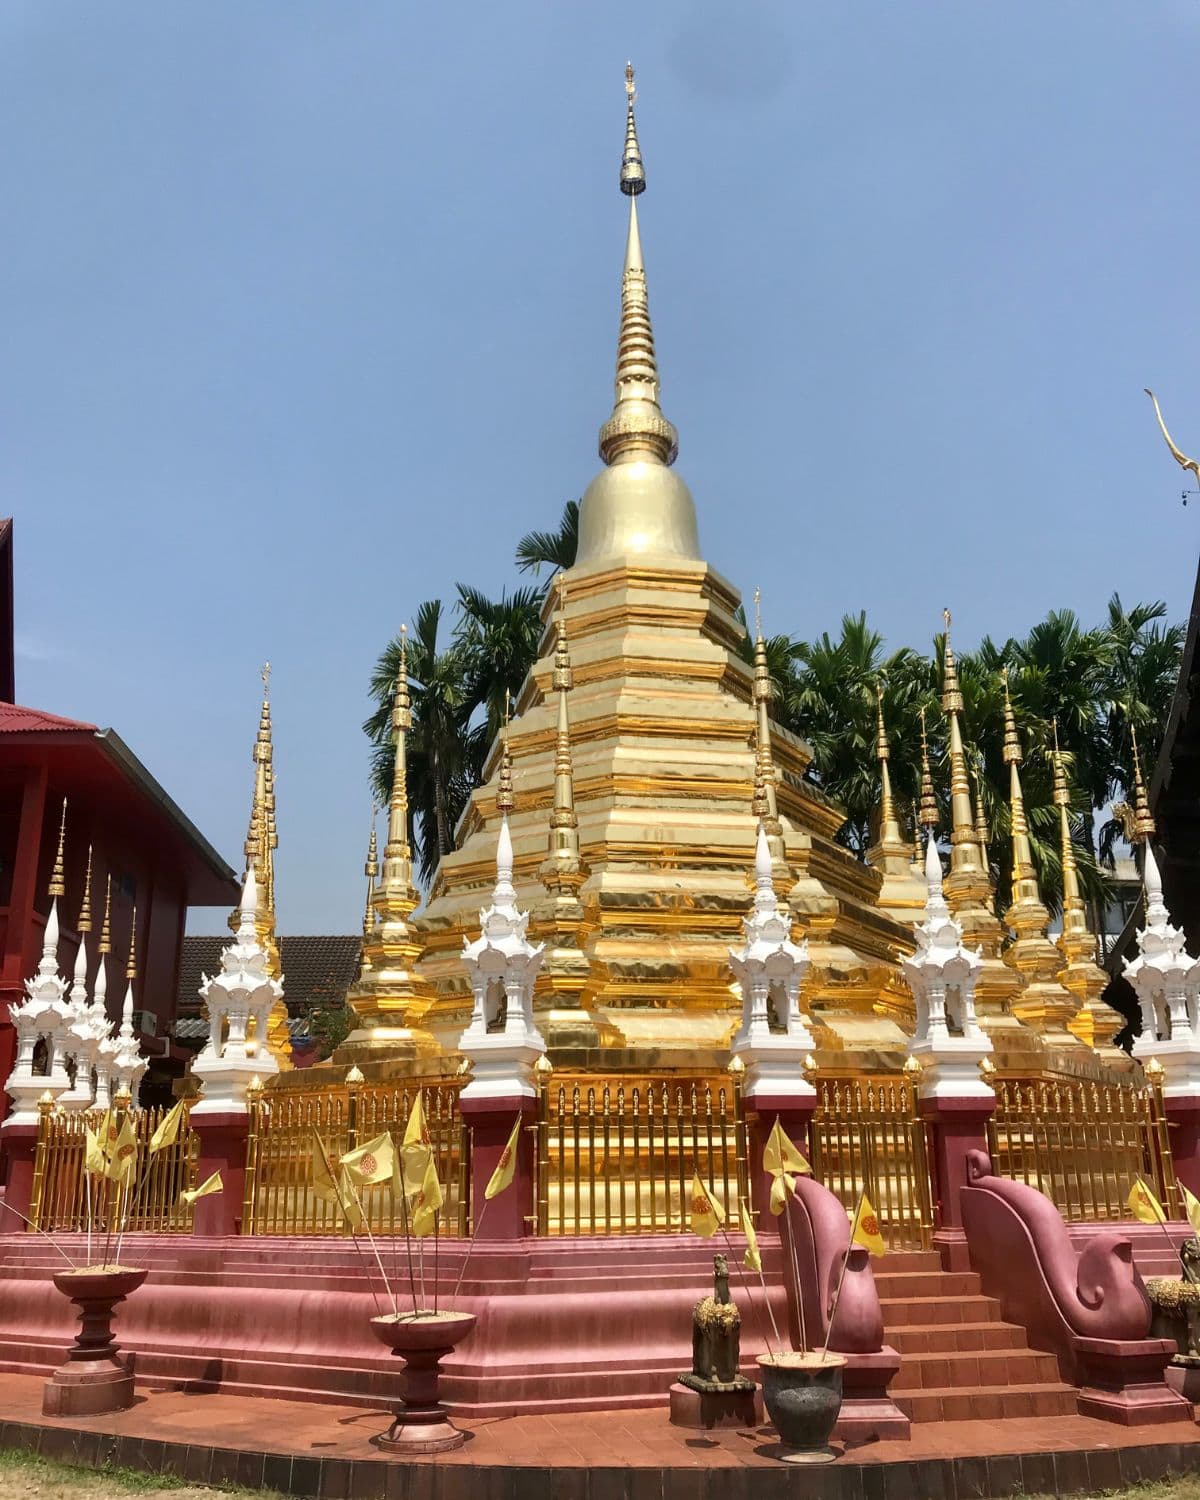 Large golden chedi surrounded by white shrines inside Wat Phan Tao, one of the best temples in Chiang Mai, Thailand.